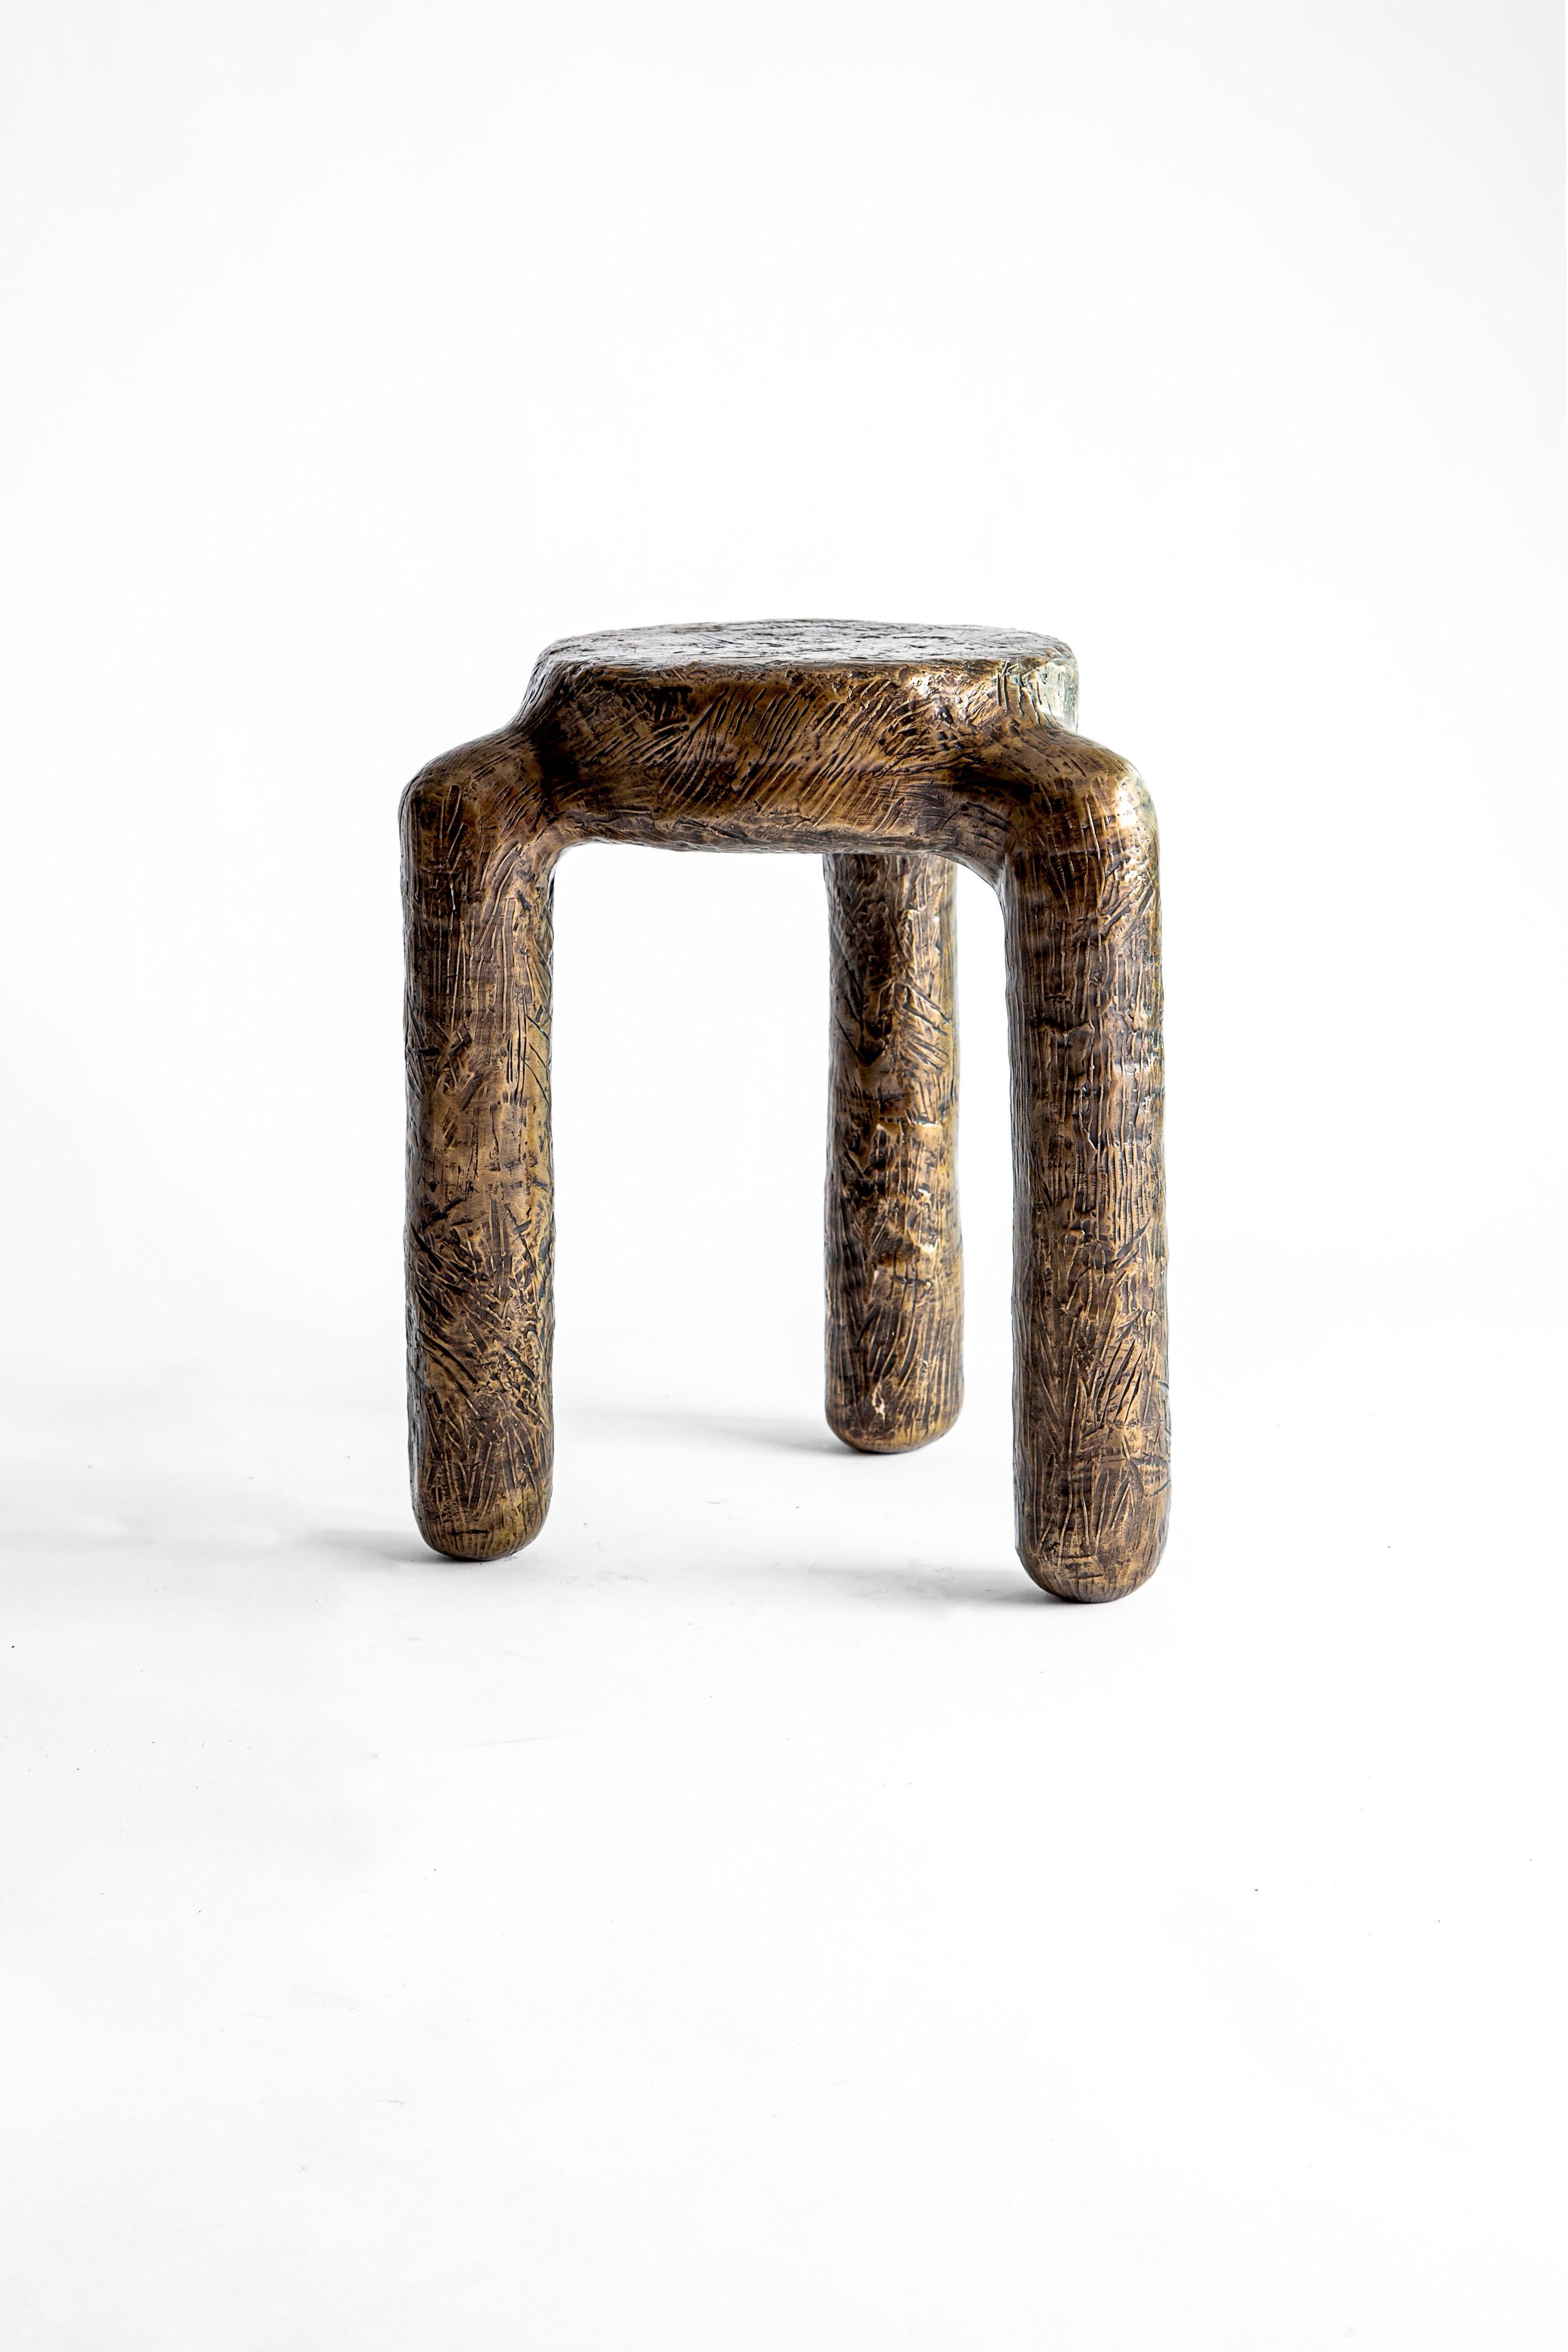 Bronzed Atang Tshikare, monolith, chairs and side table and sculpture For Sale